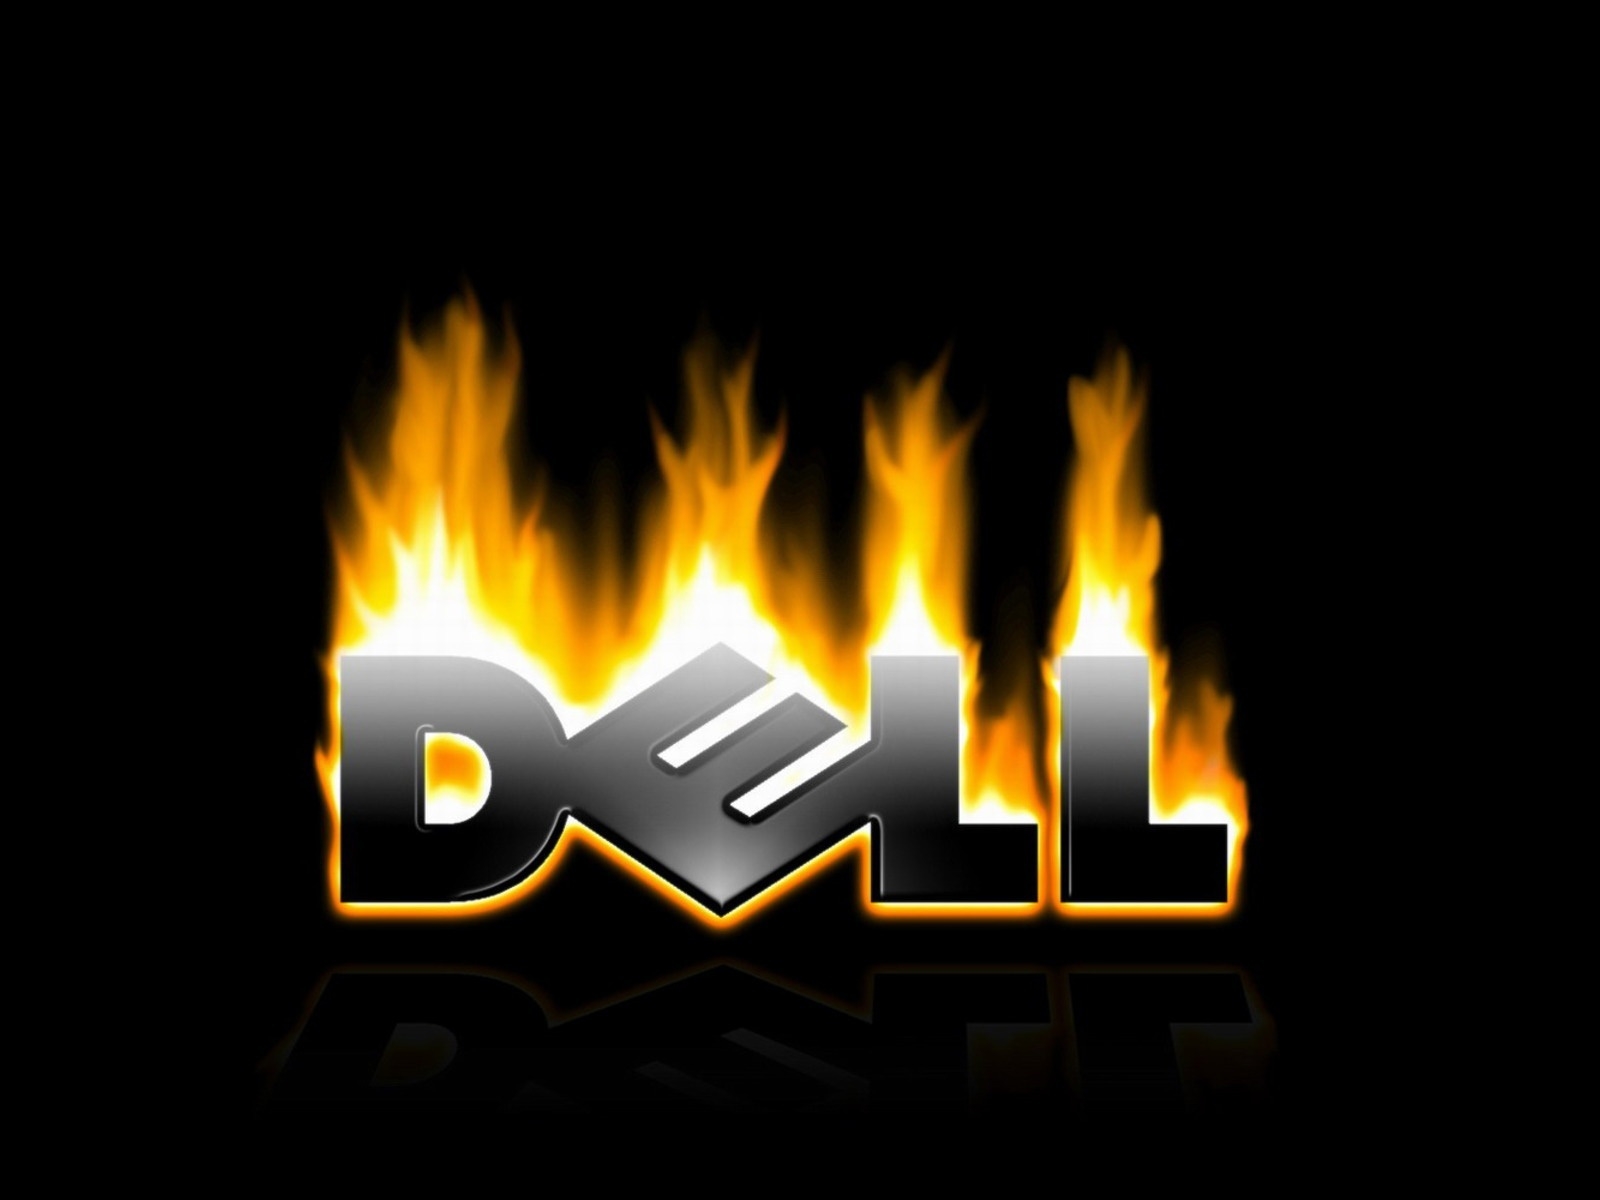 Dell in fire for 1600 x 1200 resolution